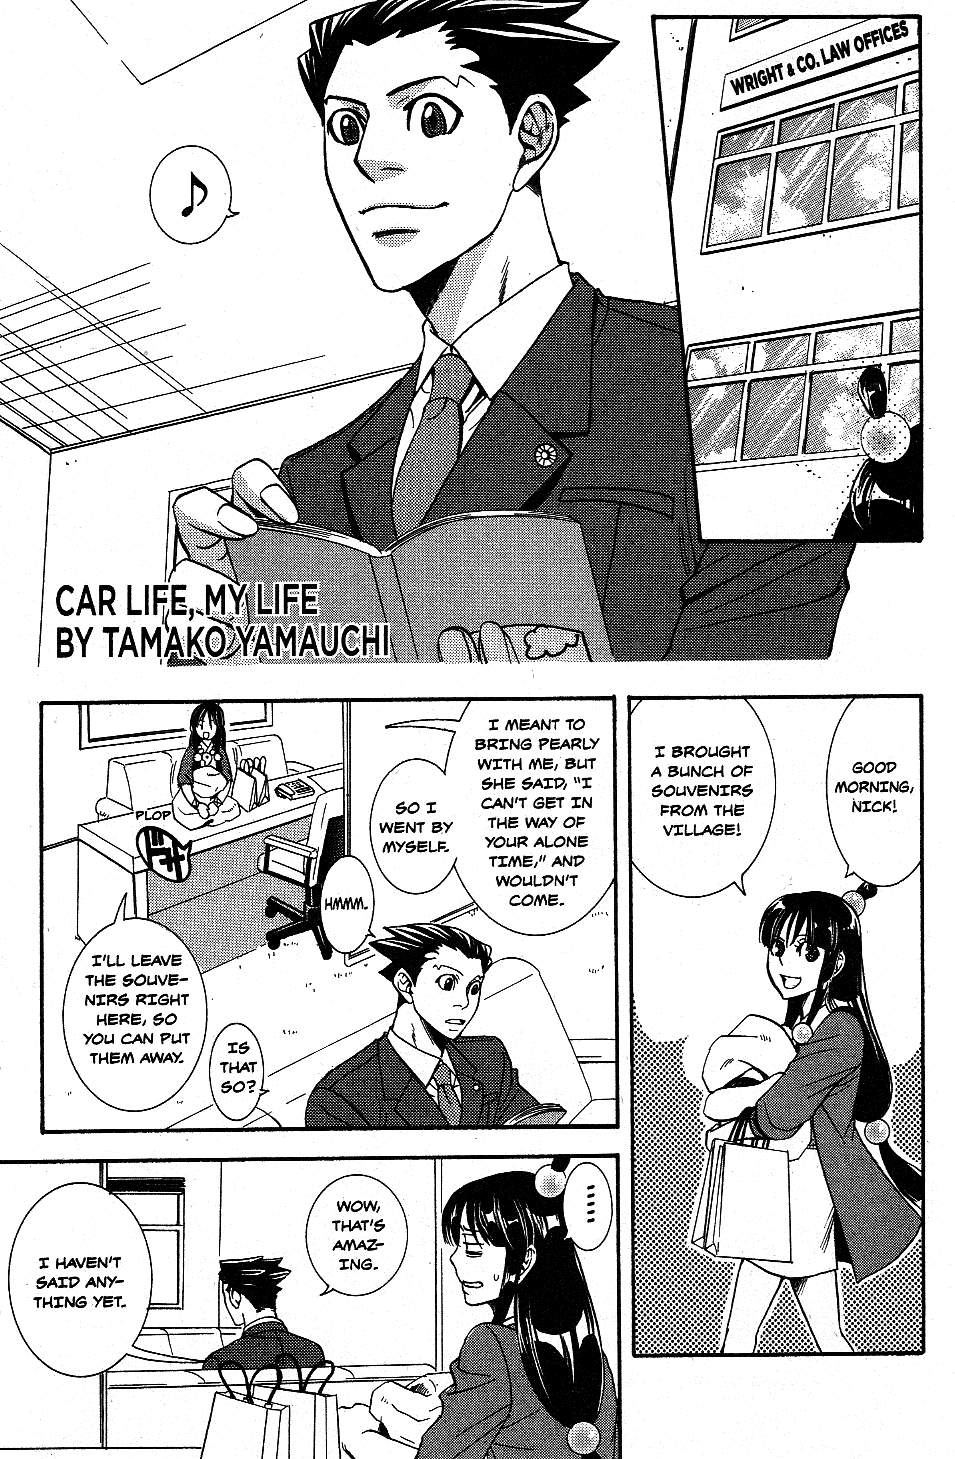 Phoenix Wright: Ace Attorney - Official Casebook Vol.1 Chapter 14: Car Life, My Life - By Tamako Yamauchi - Picture 1